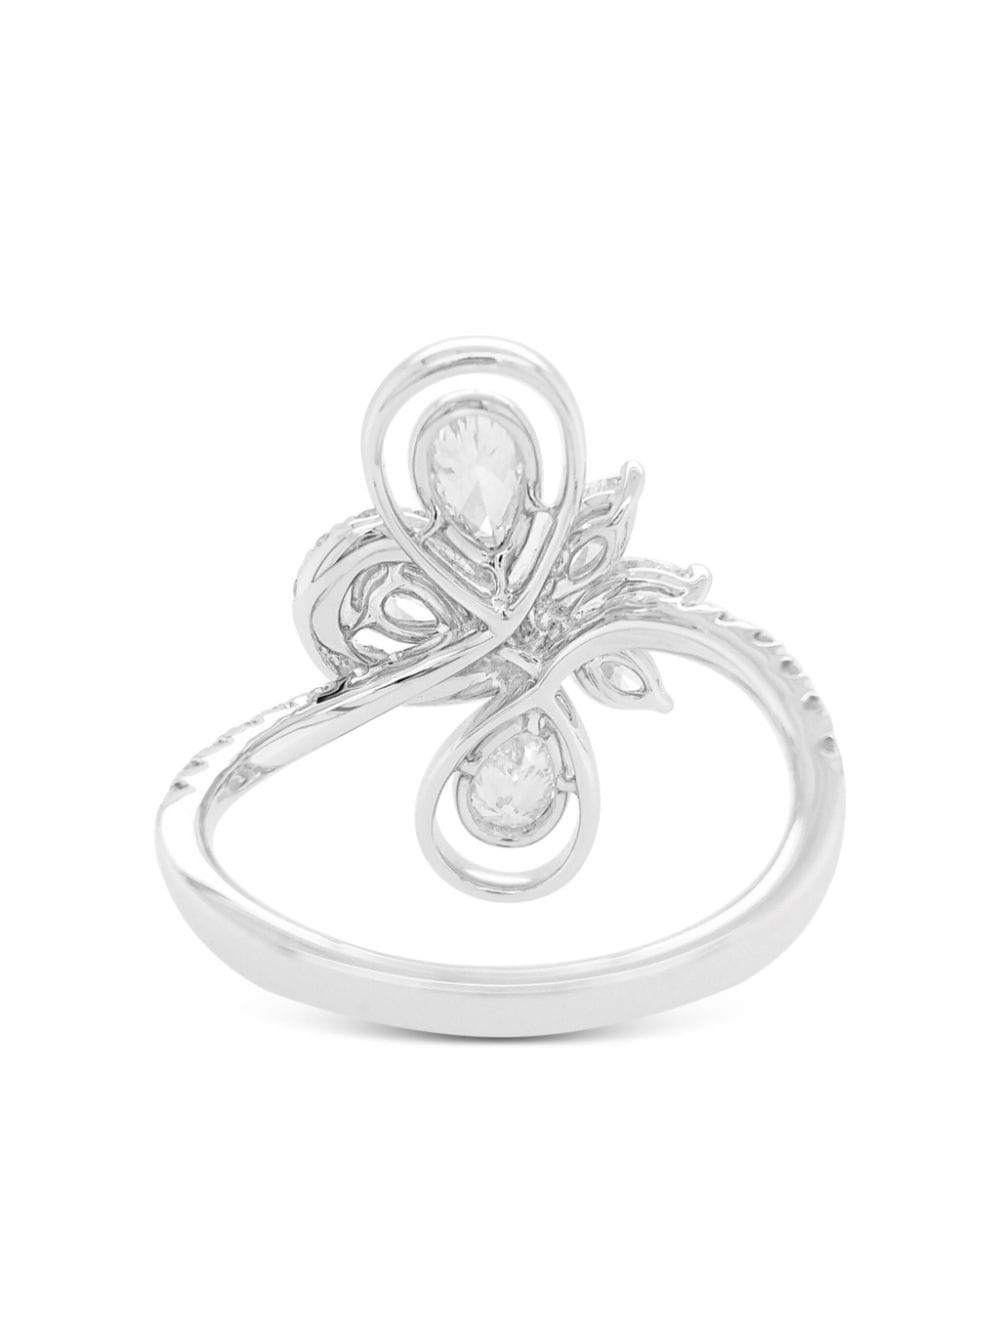 Shop Hyt Jewelry Platinum And Diamond Ring In Silver